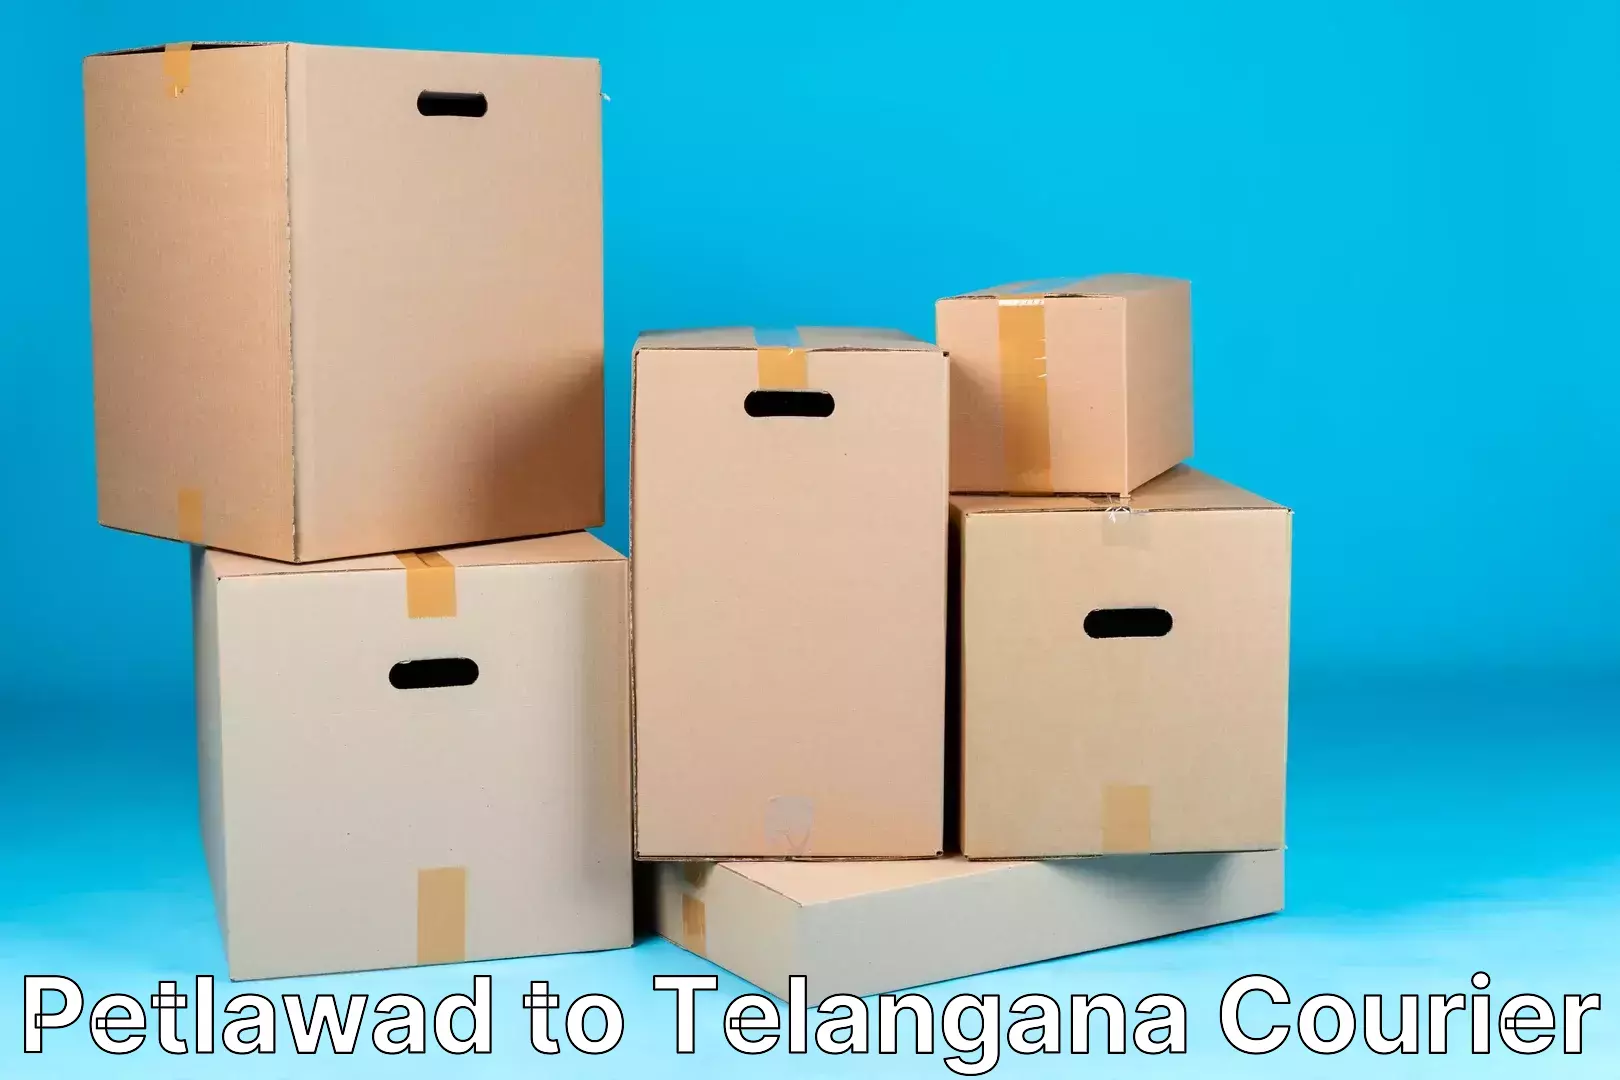 Quality courier partnerships in Petlawad to Telangana